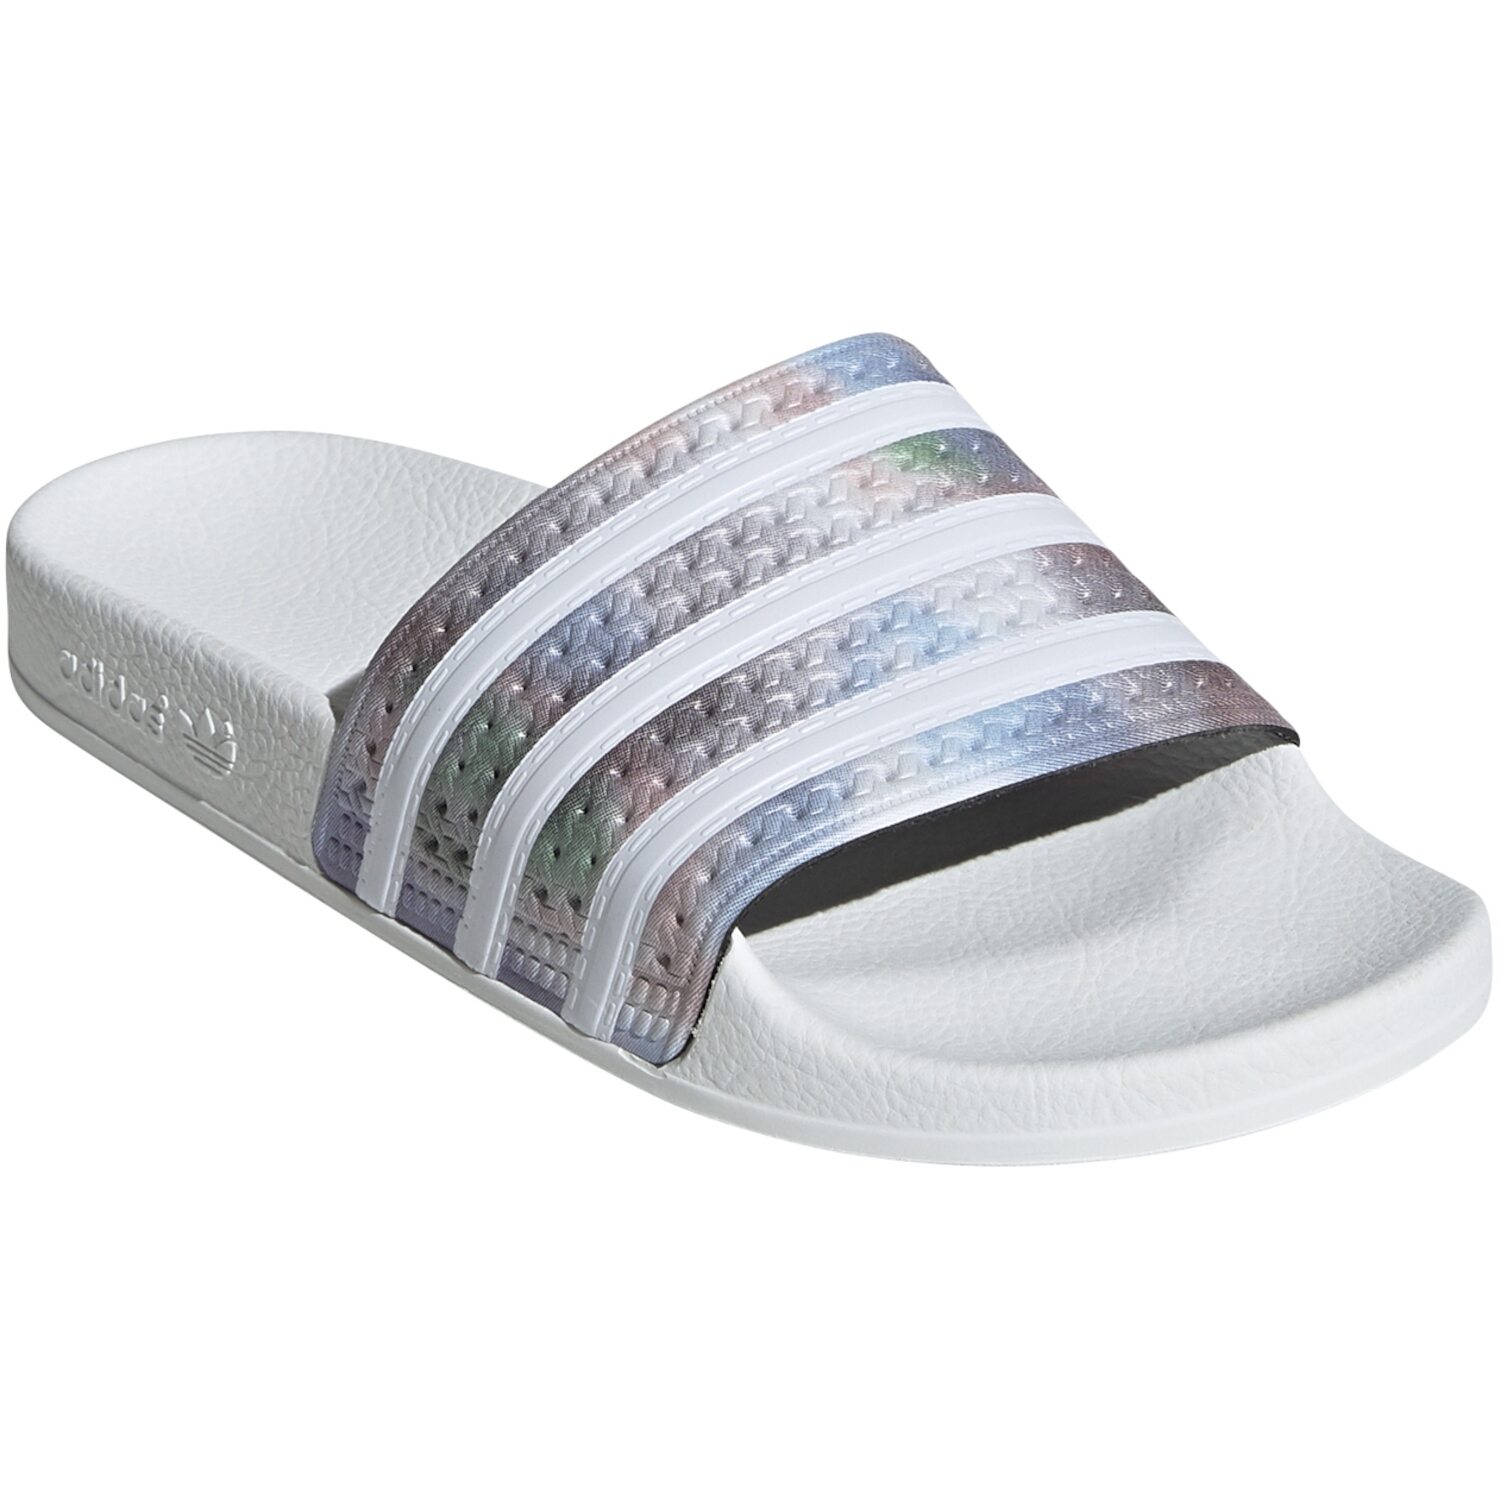 Email schrijven periode Rationeel ADIDAS ADILETTE DAMES BADSLIPPERS H00150 - wbsport.nl